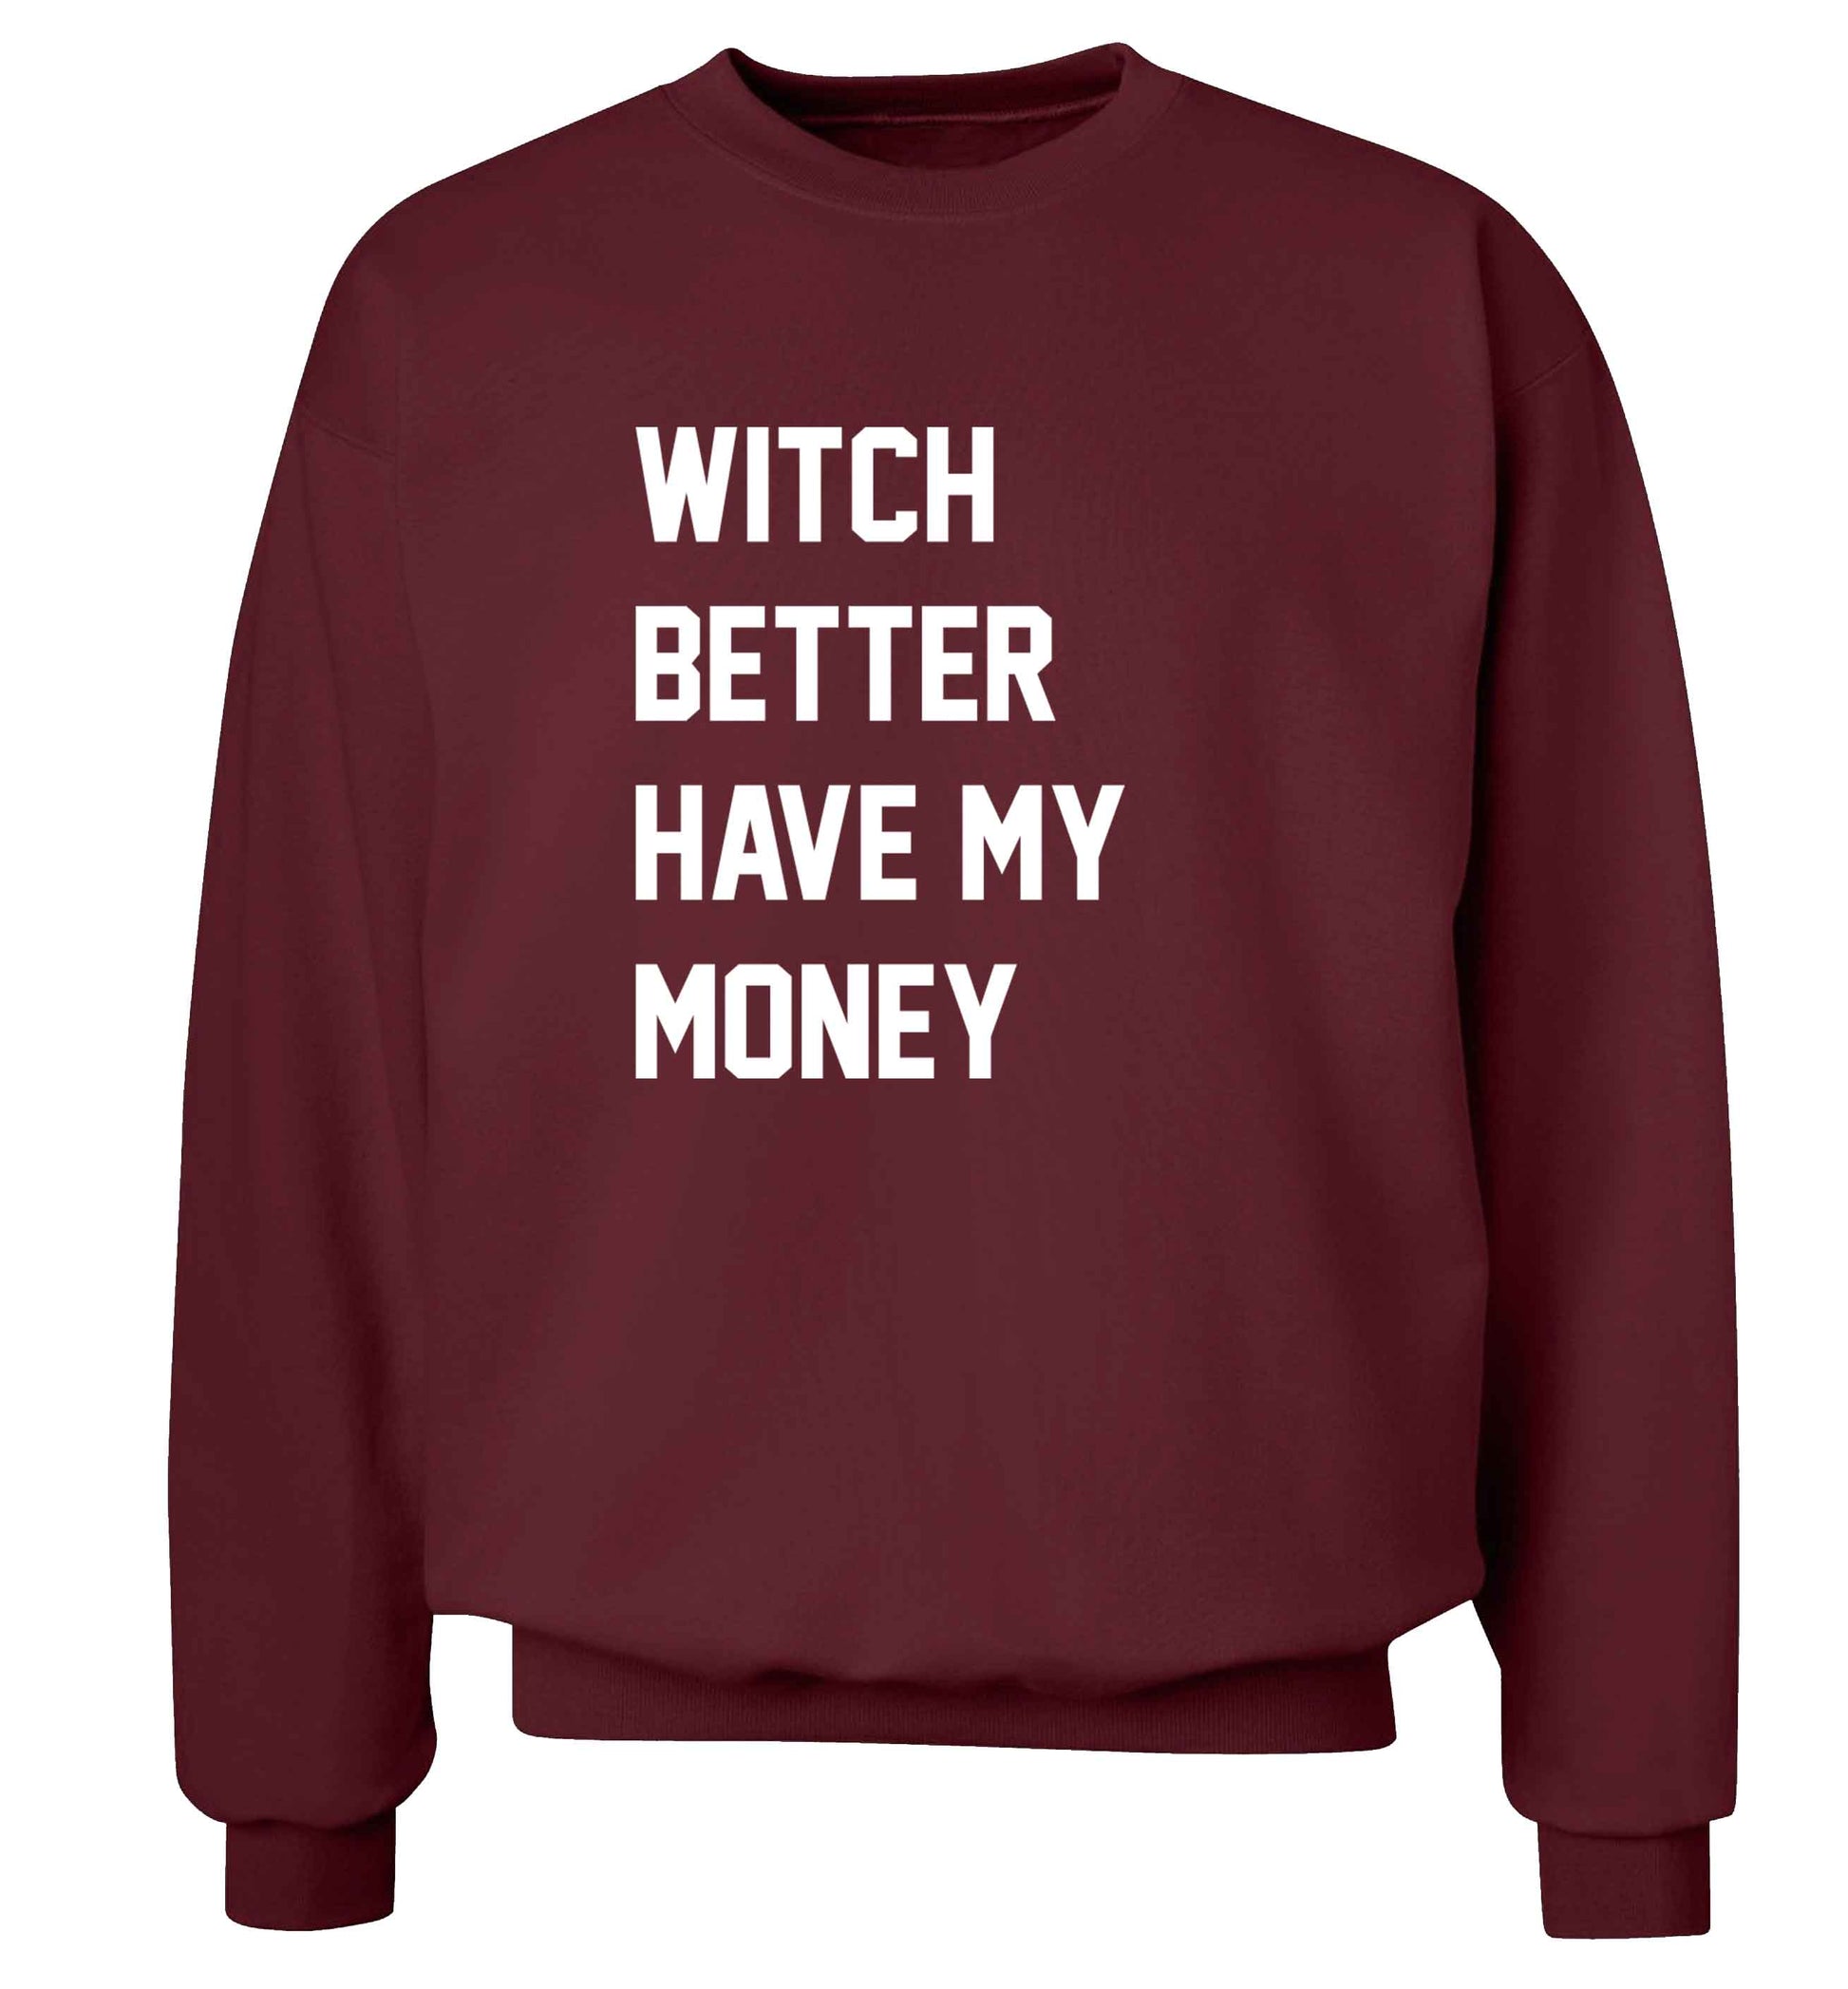 Witch better have my money adult's unisex maroon sweater 2XL